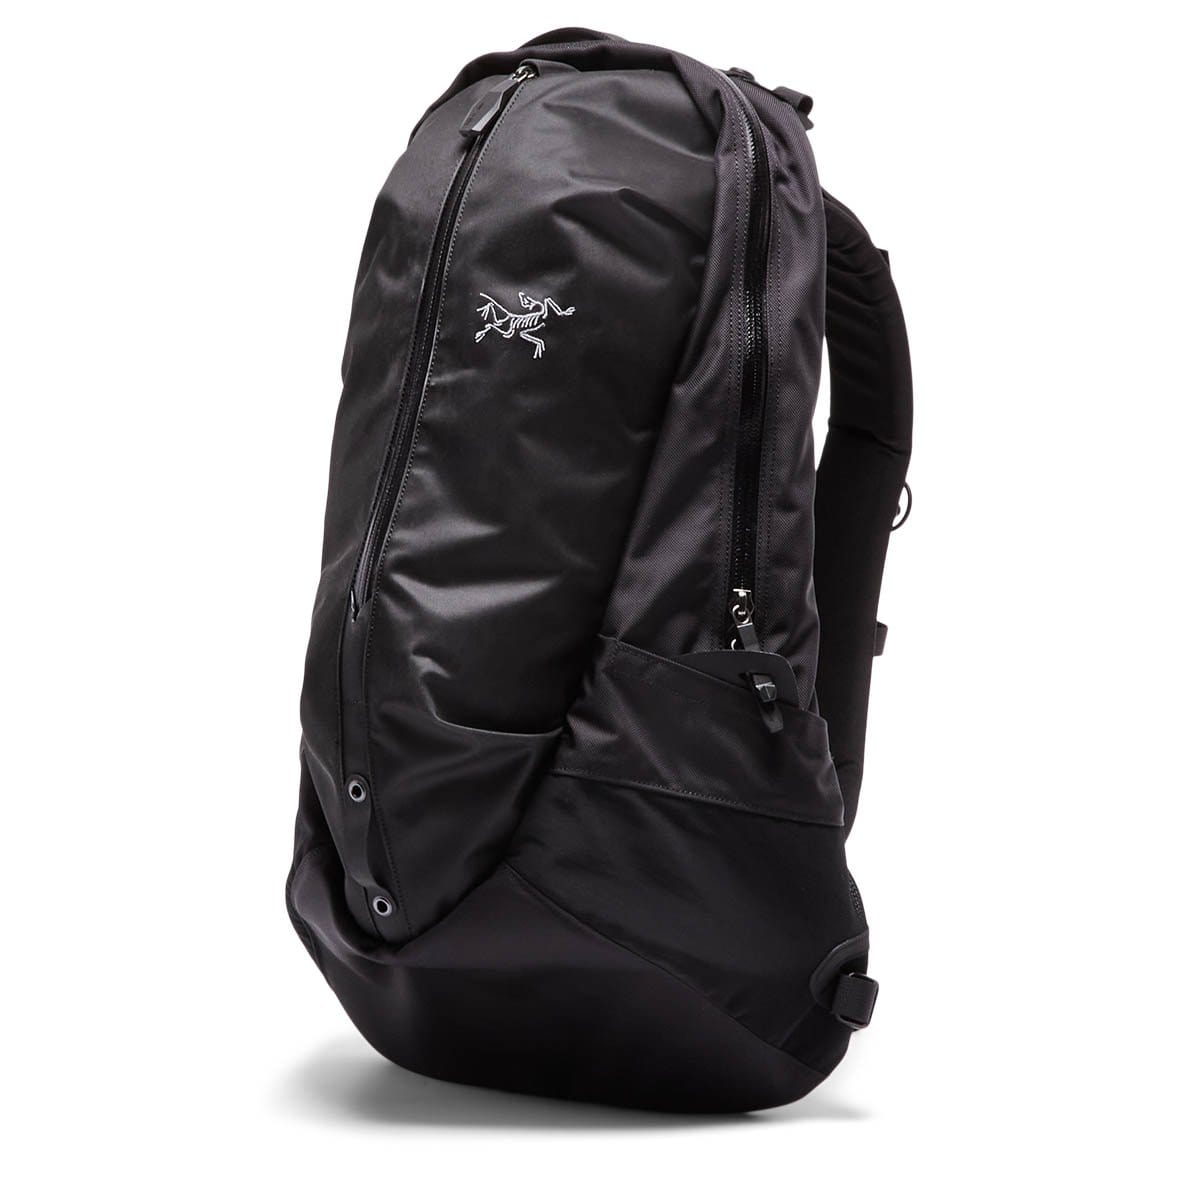 Arc'teryx Bags & Accessories STEALTH BLACK / OS ARRO 22 BACKPACK